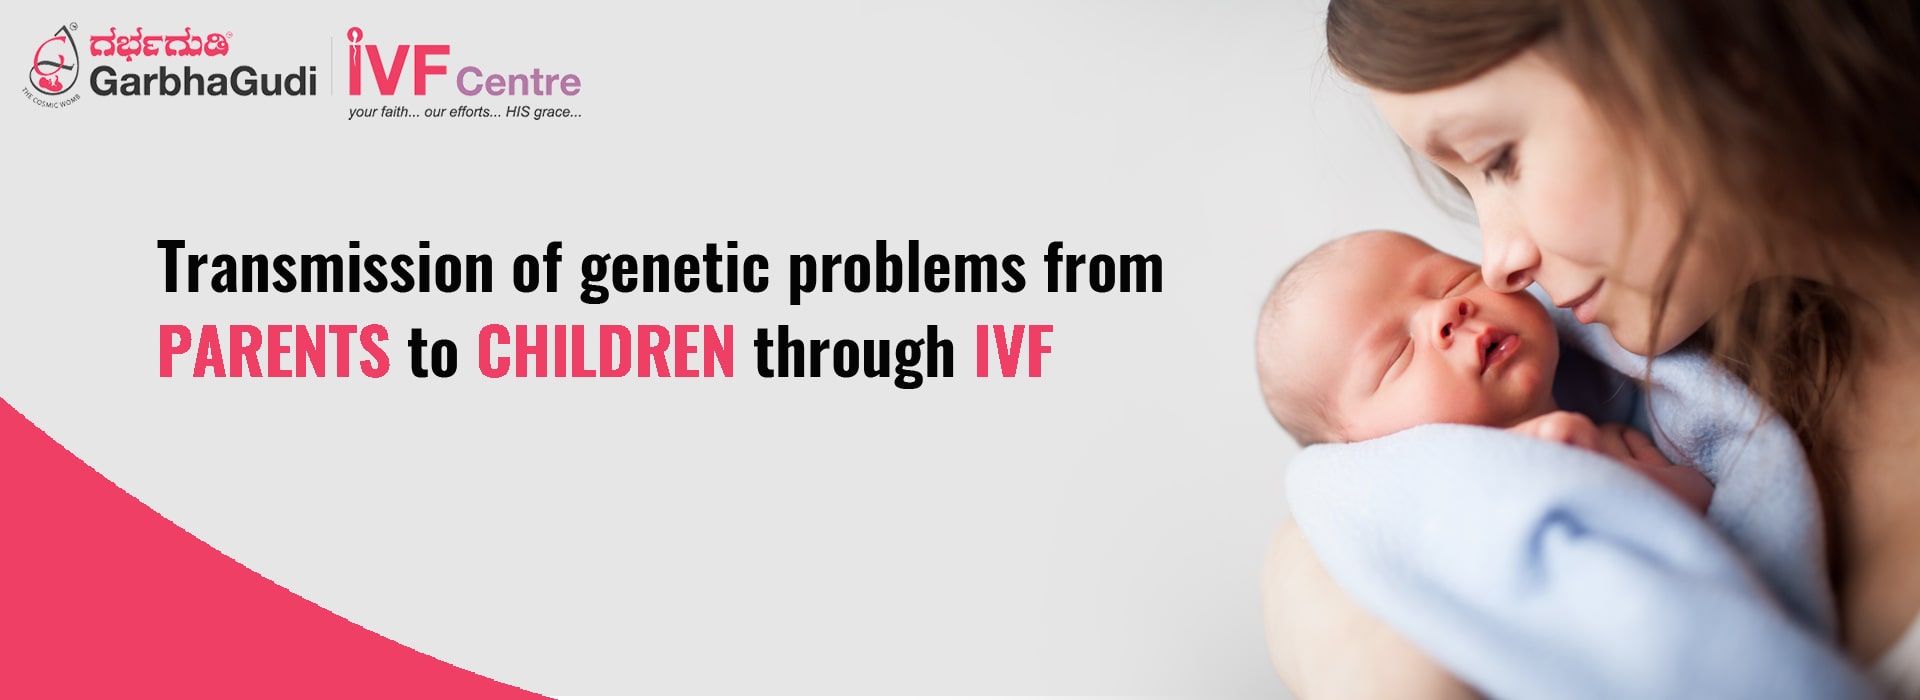 Transmission of genetic problems from parents to children through IVF